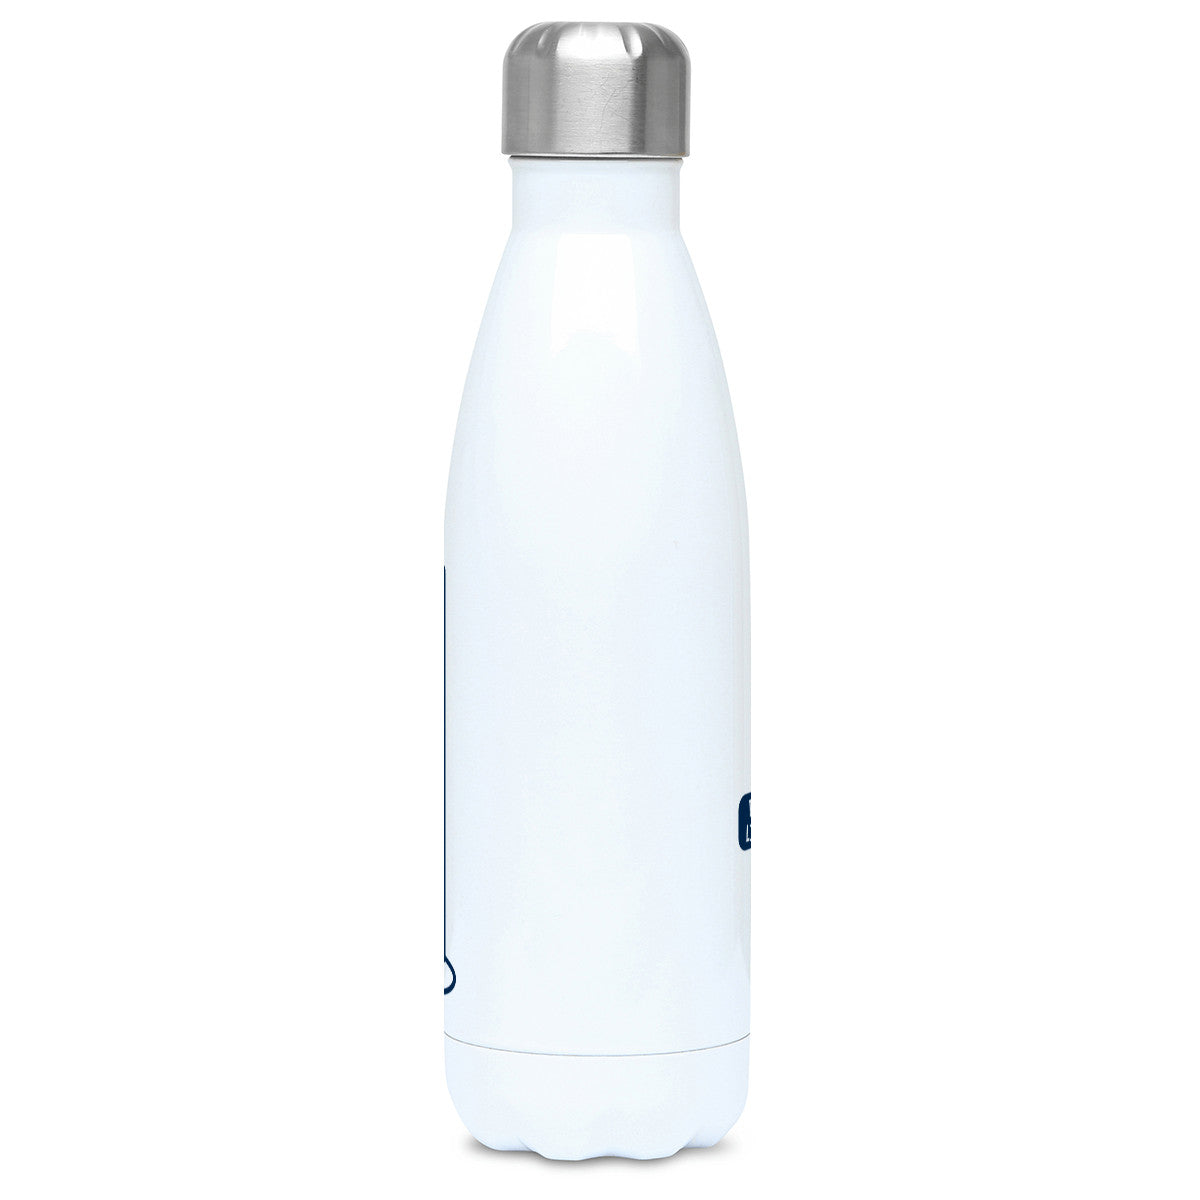 Side view of a white metal insulated drinks bottle with the lid on and a hint of the graduated cylinder design showing on the right and left hand edges